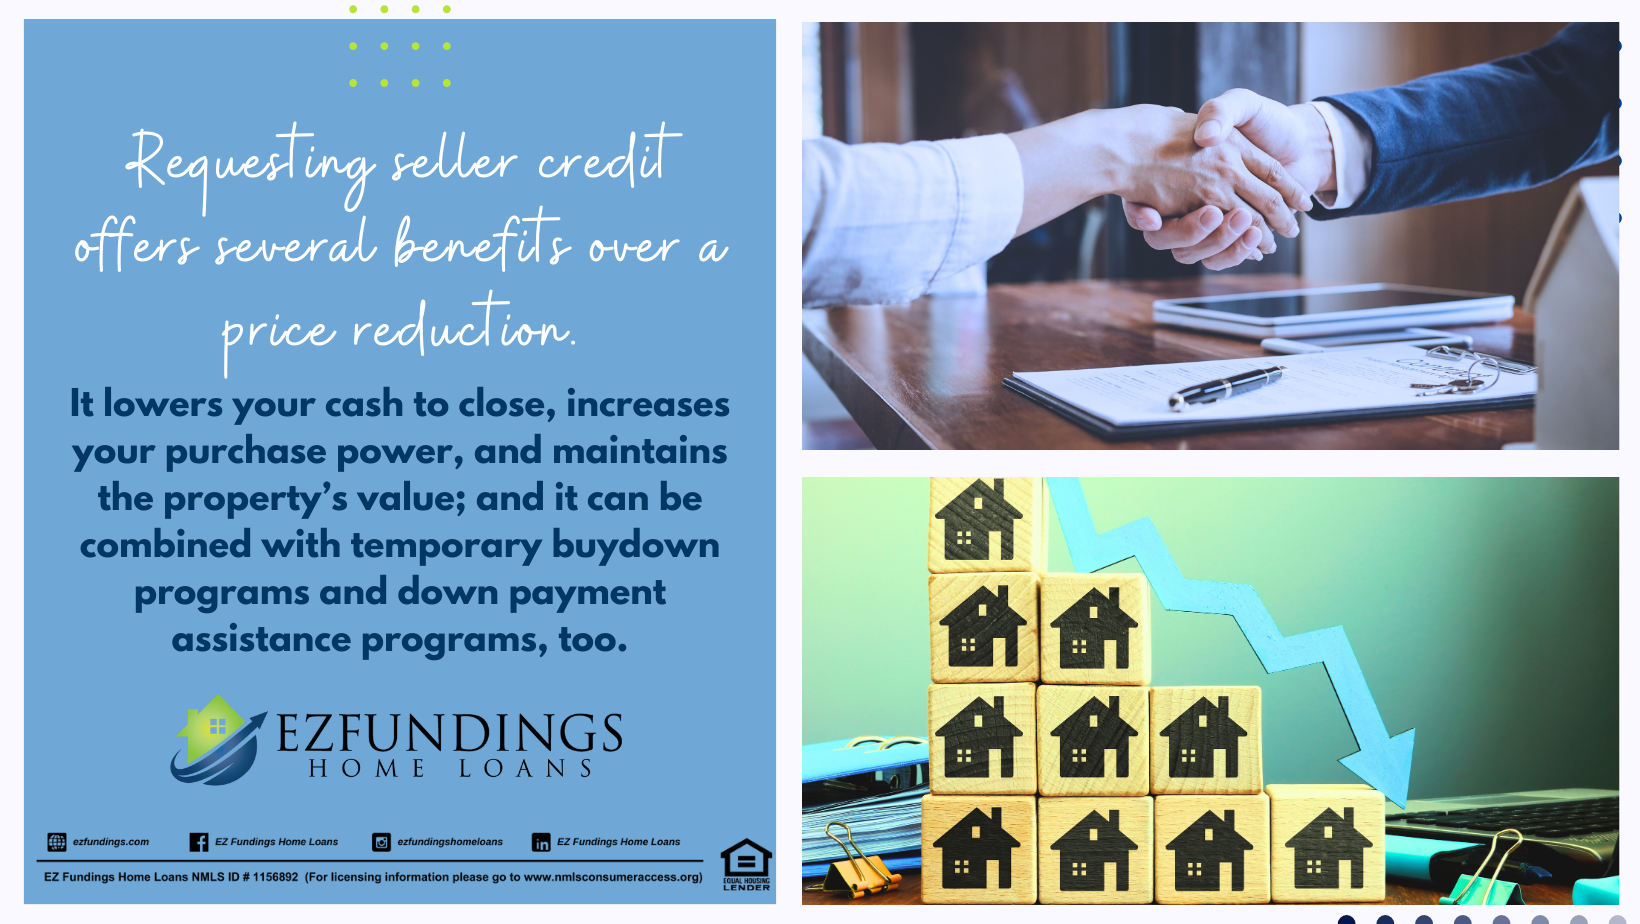 Mortgage: Benefits Of Requesting Seller Credit Over Price Reduction: Lower cash to close, higher purchase power